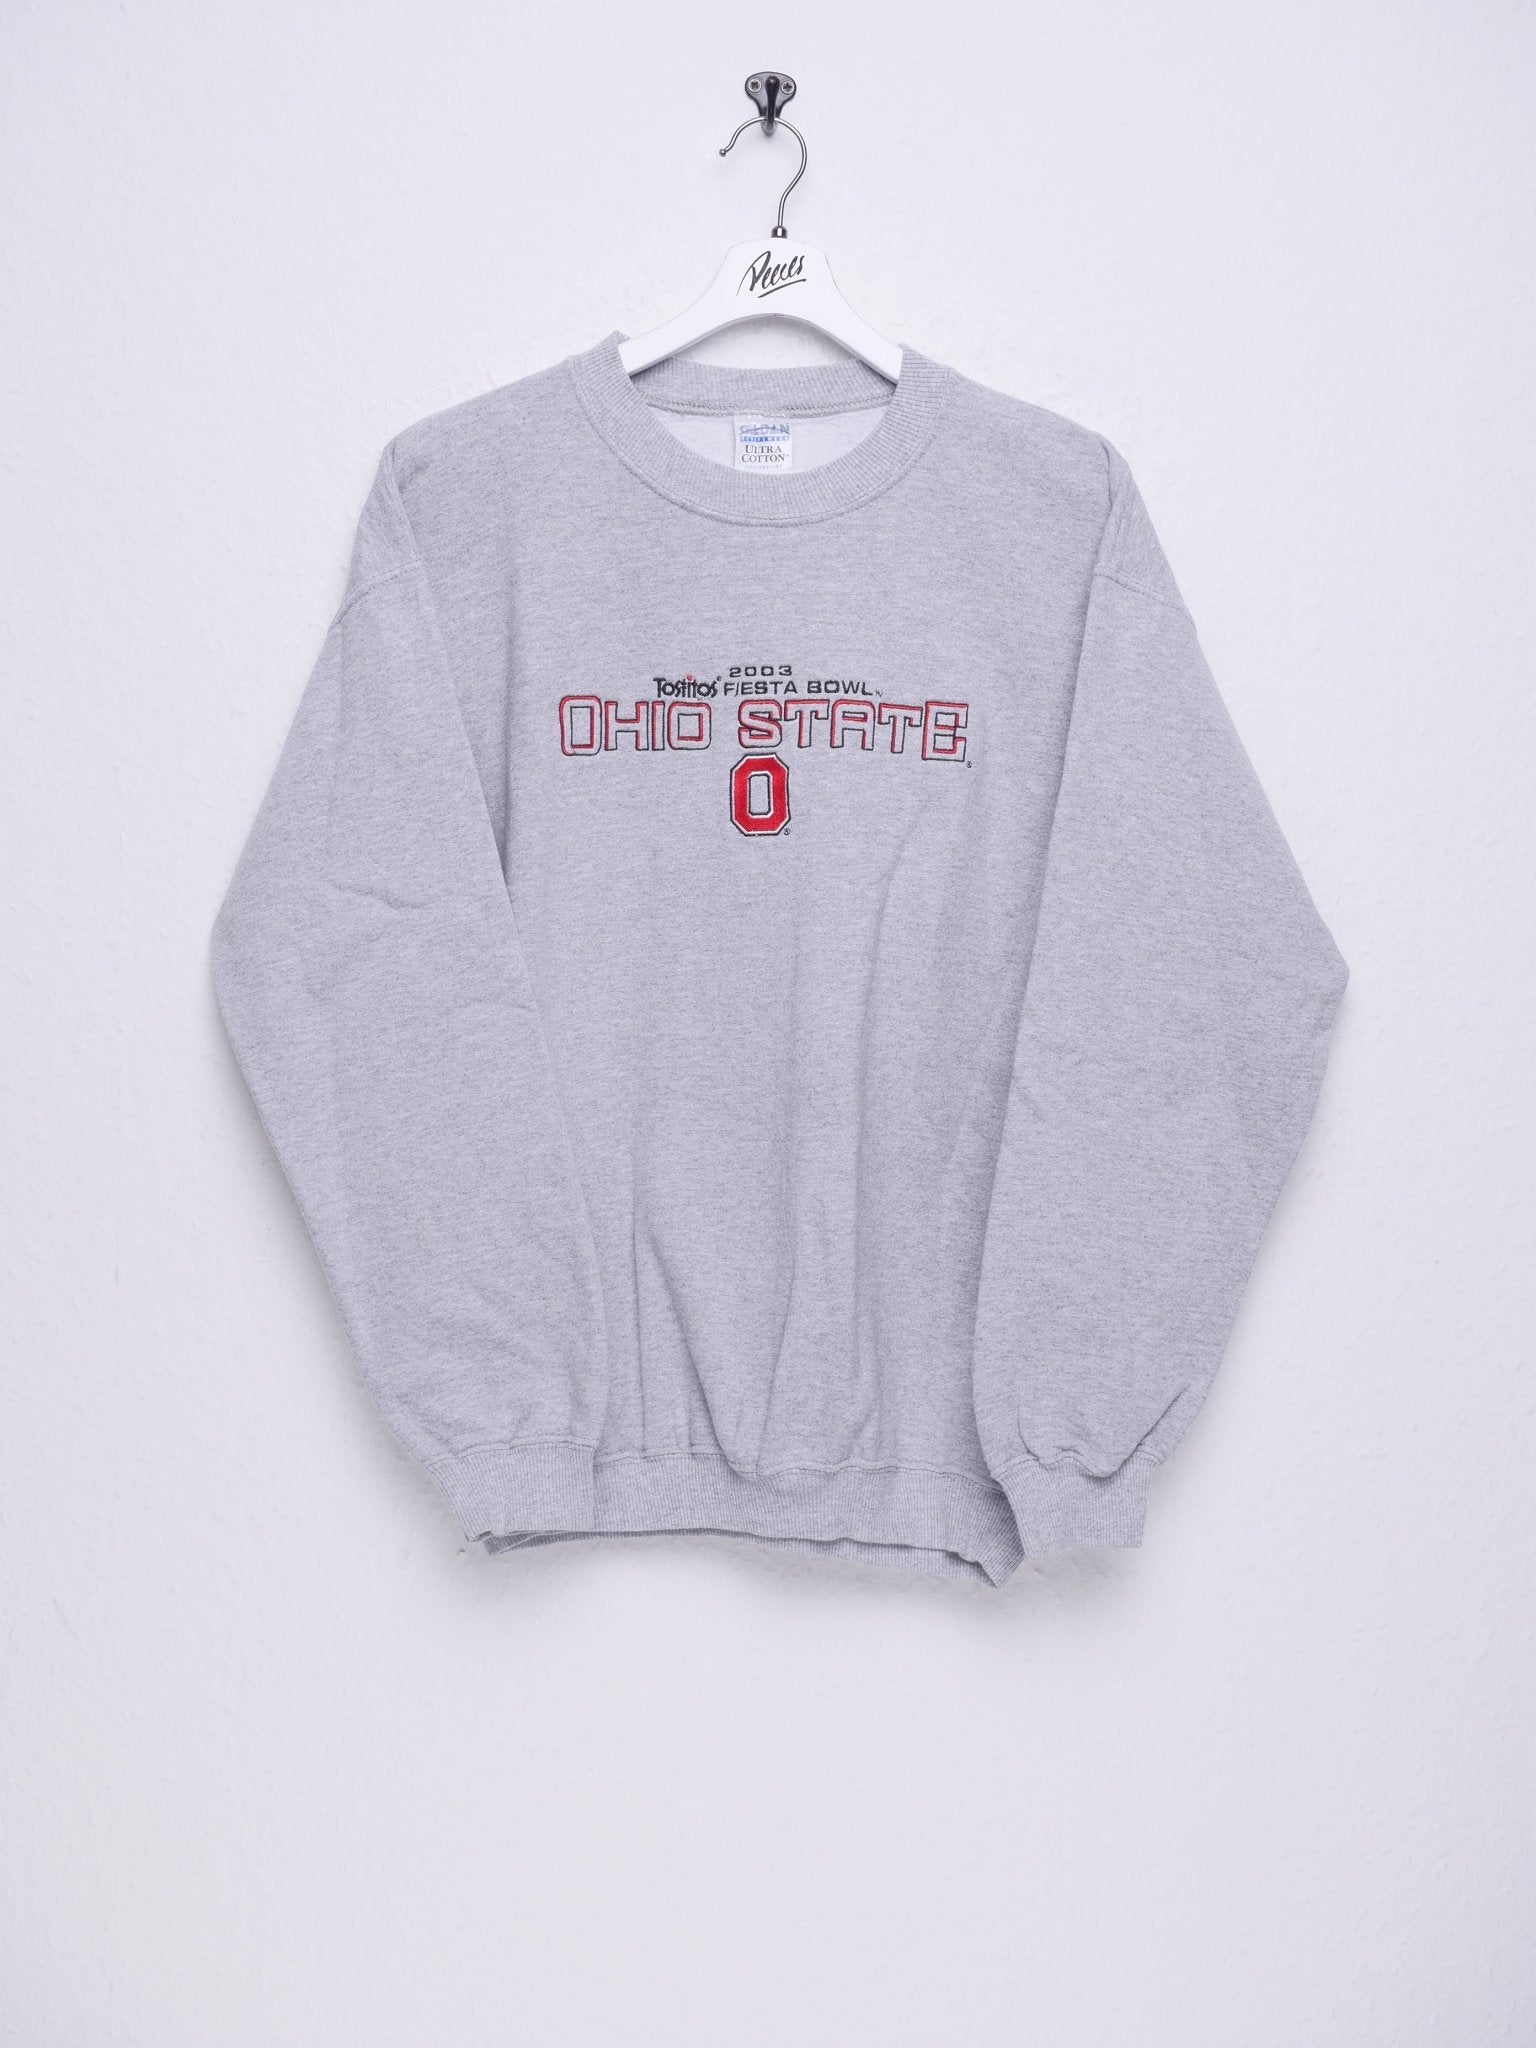 Tostitos Fiesta Bowl 2003 Ohio State embroidered Spellout grey Sweater - Peeces